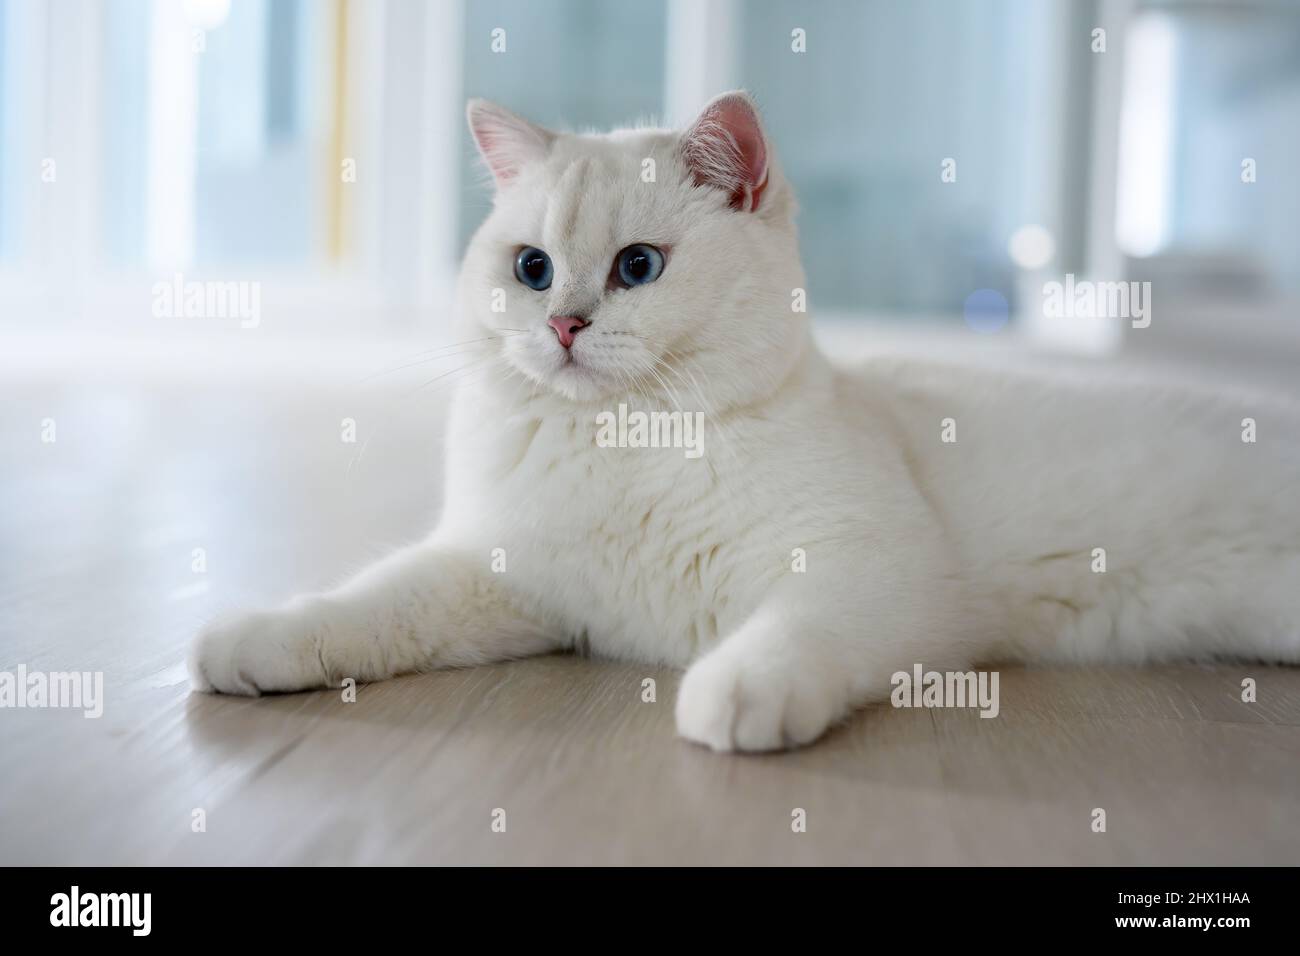 Handsome young cat posing sitting and look straight back, silver British Shorthair cat with big beautiful blue eyes, Contest grade white pedigree cat. Stock Photo